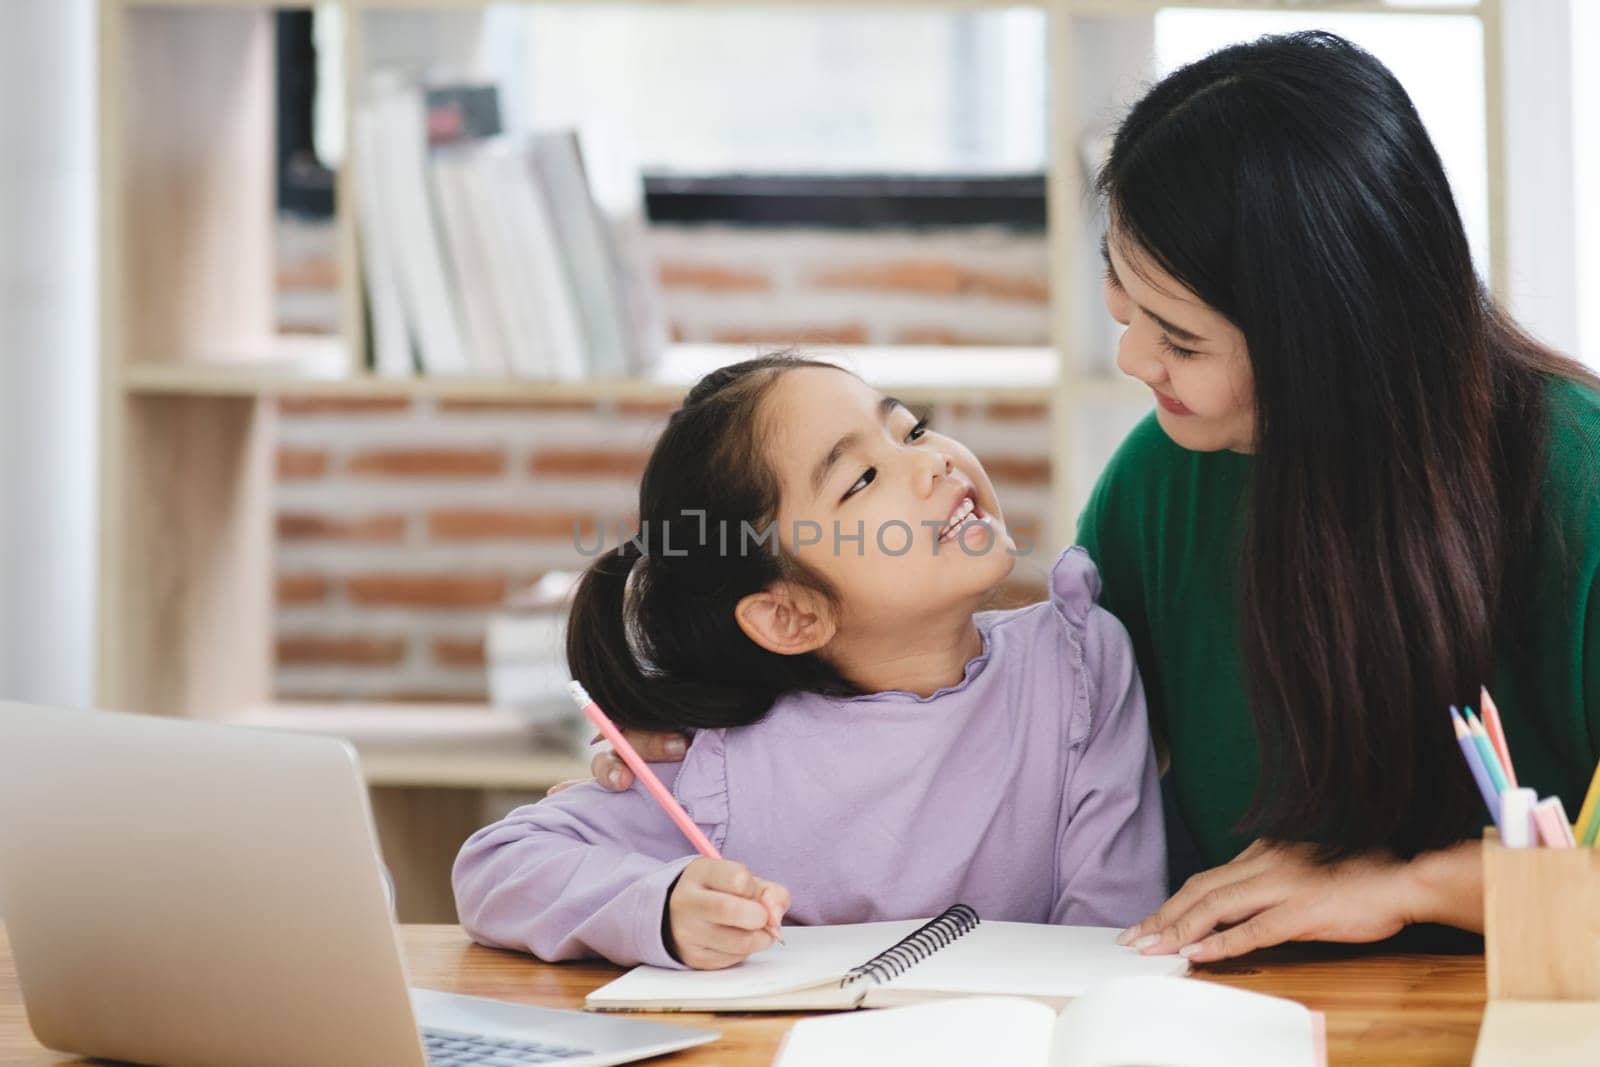 A woman is helping a young girl with her homework by ijeab